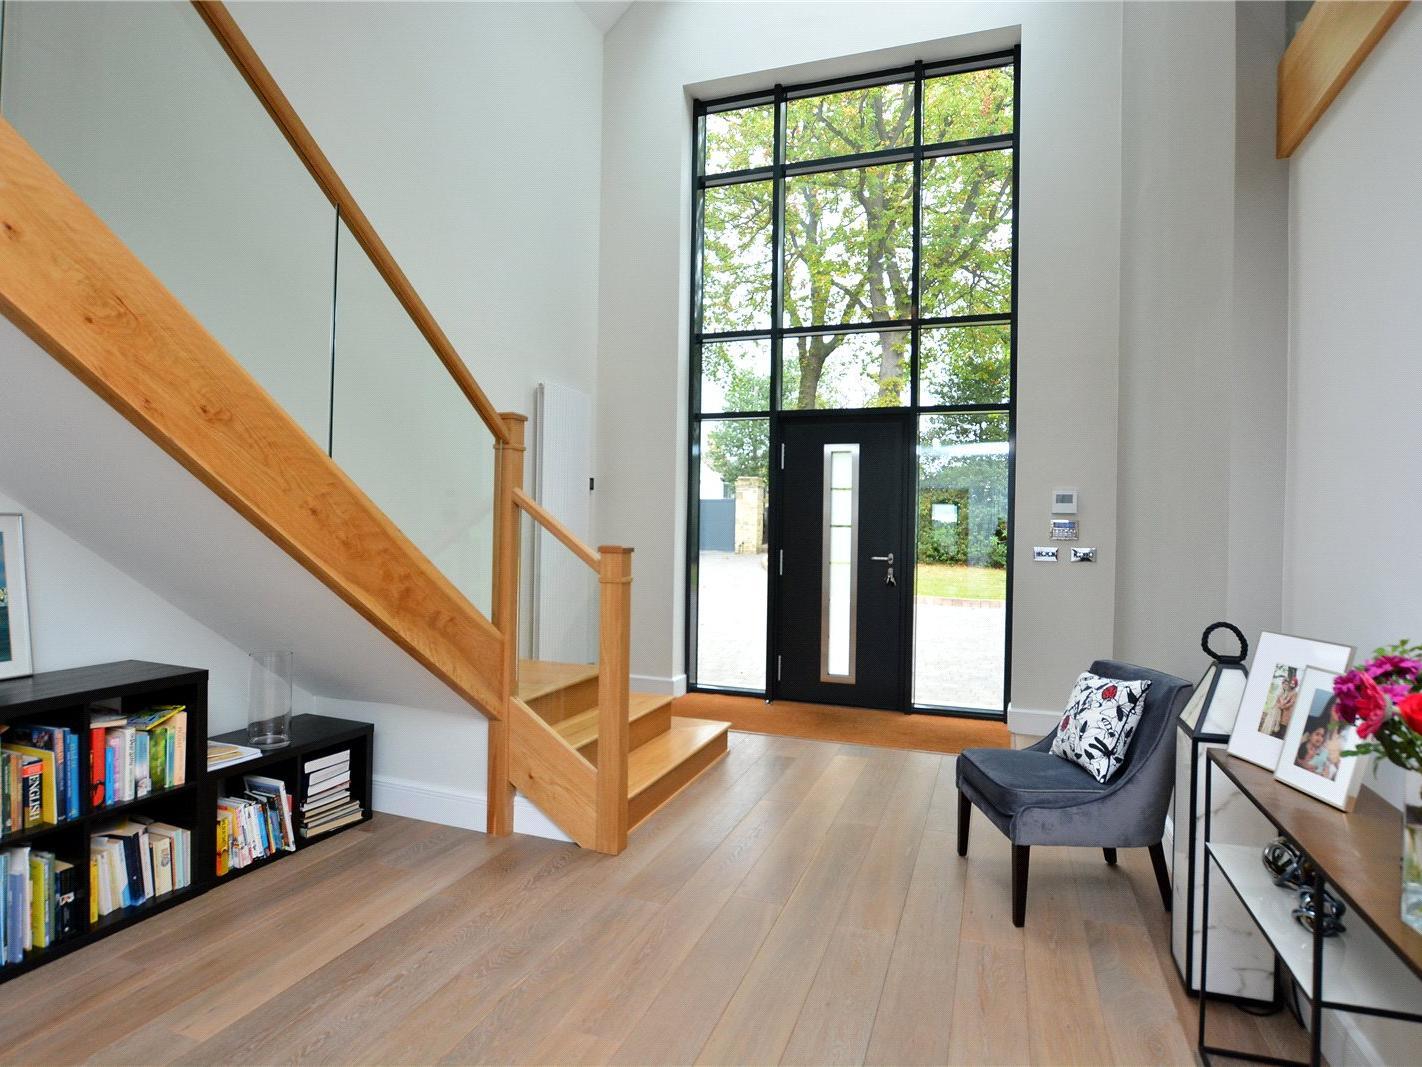 The triple height hallway features floor to ceiling windows and solid oak flooring.